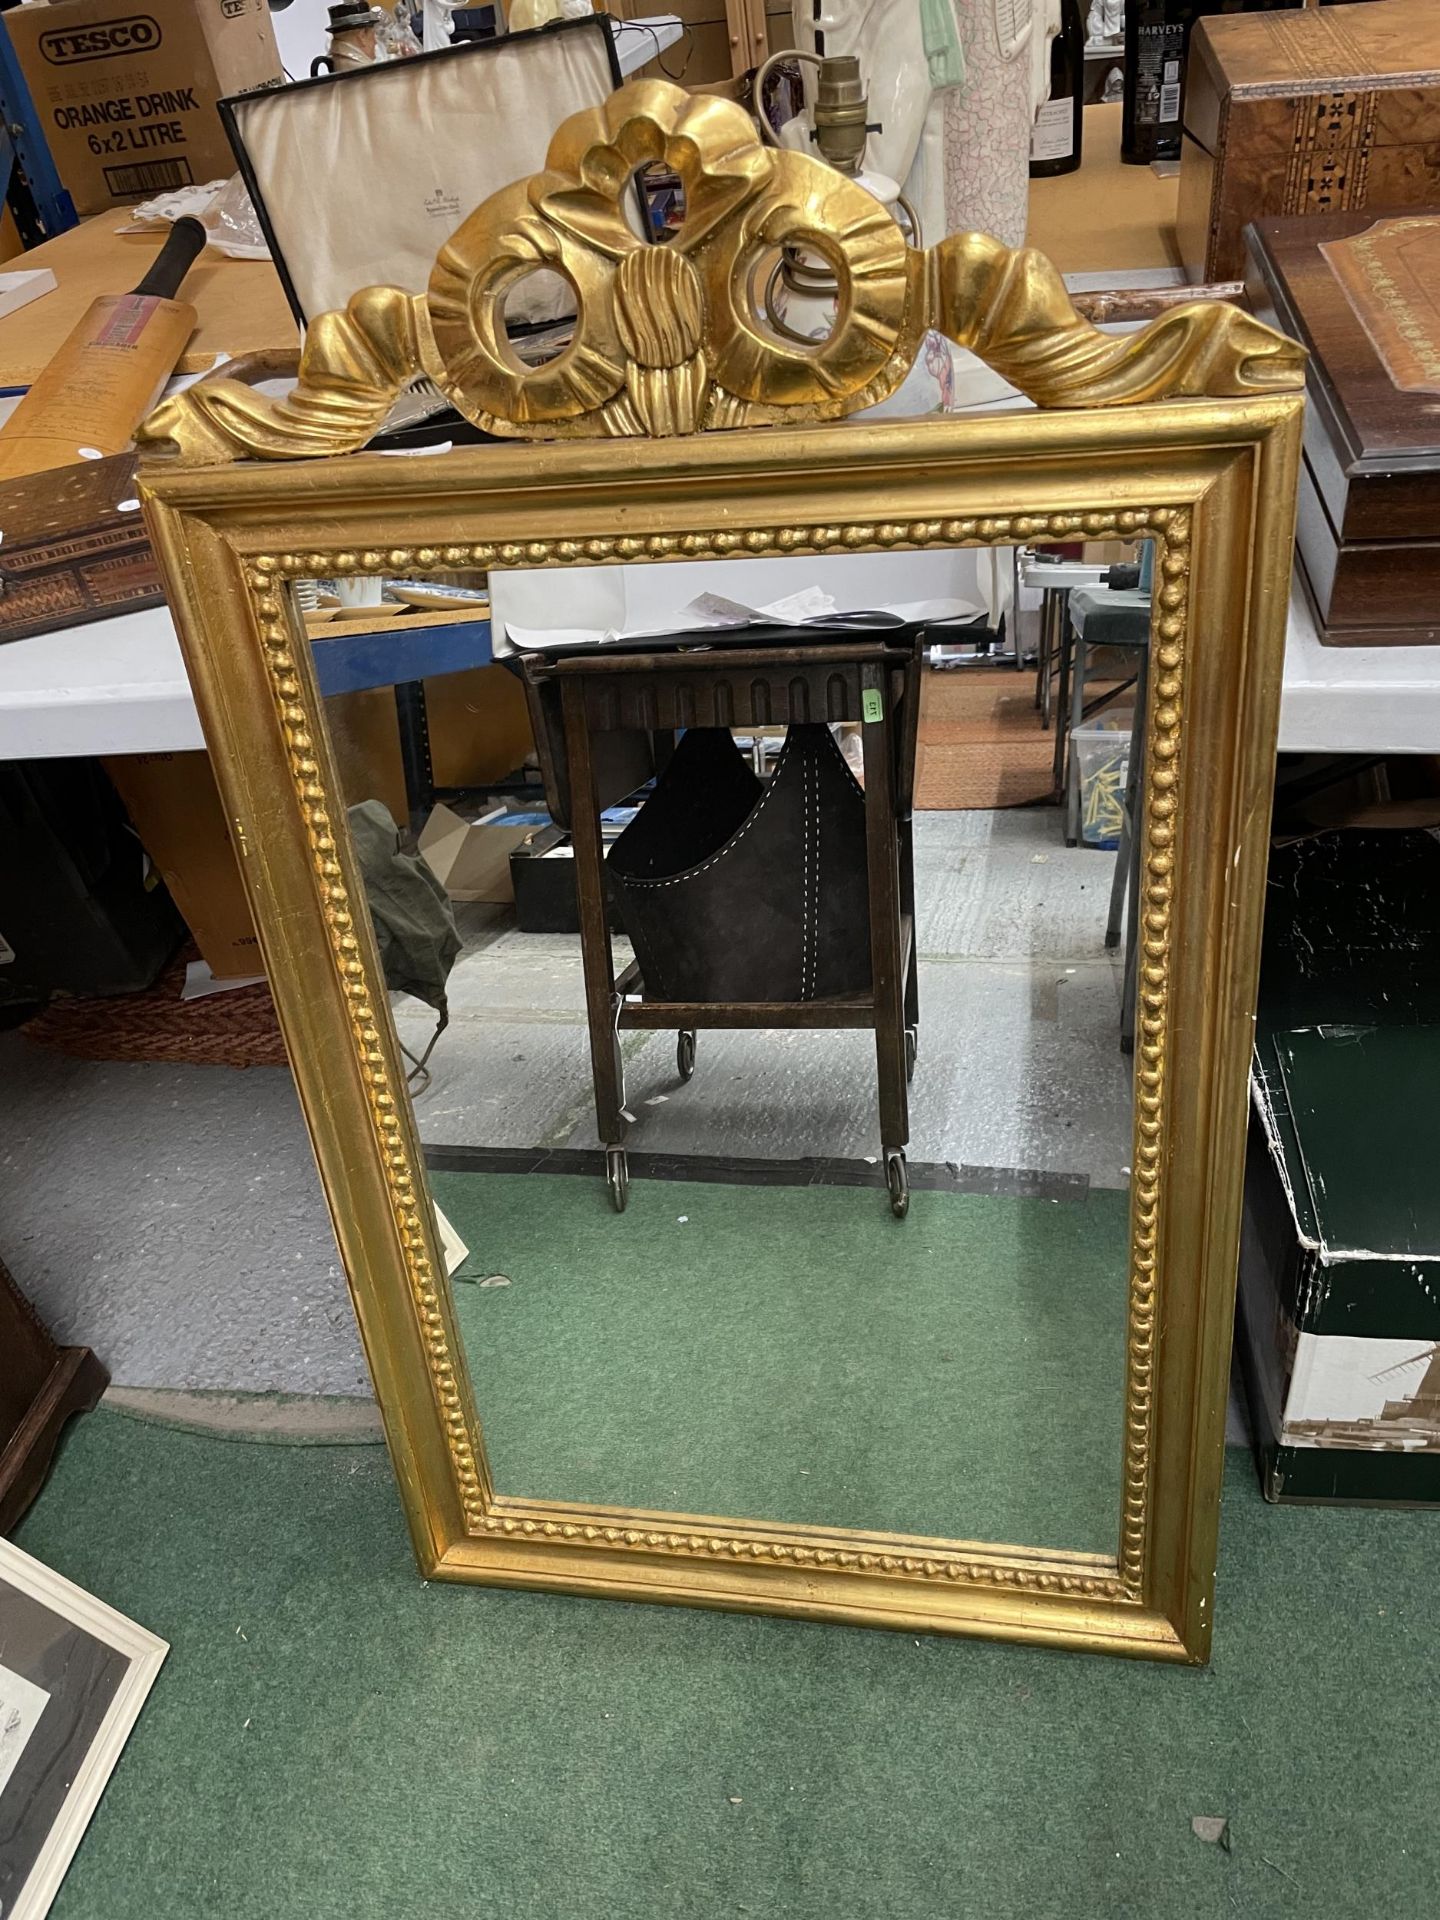 AN ORNATE GILT FRAMED MIRROR WITH RIBBON DESIGN TOP - Image 2 of 2